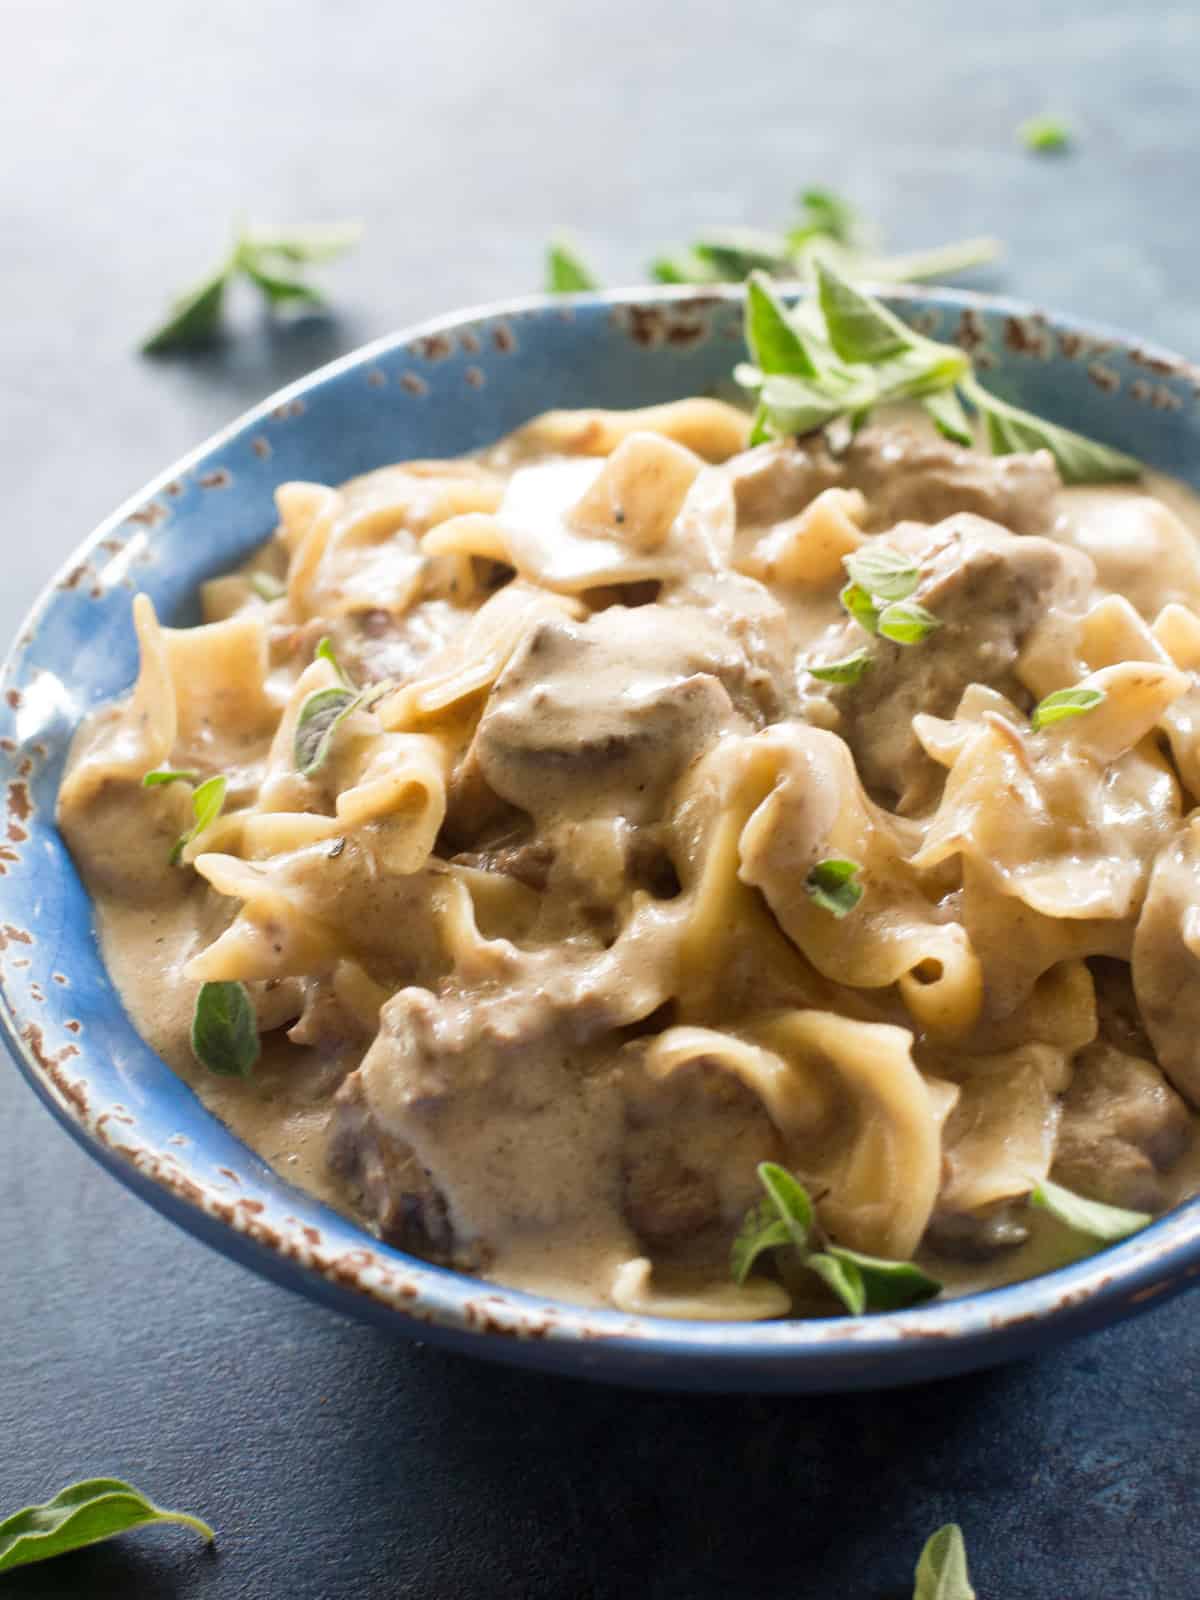 Beef Stroganoff Recipe - The Girl Who Ate Everything